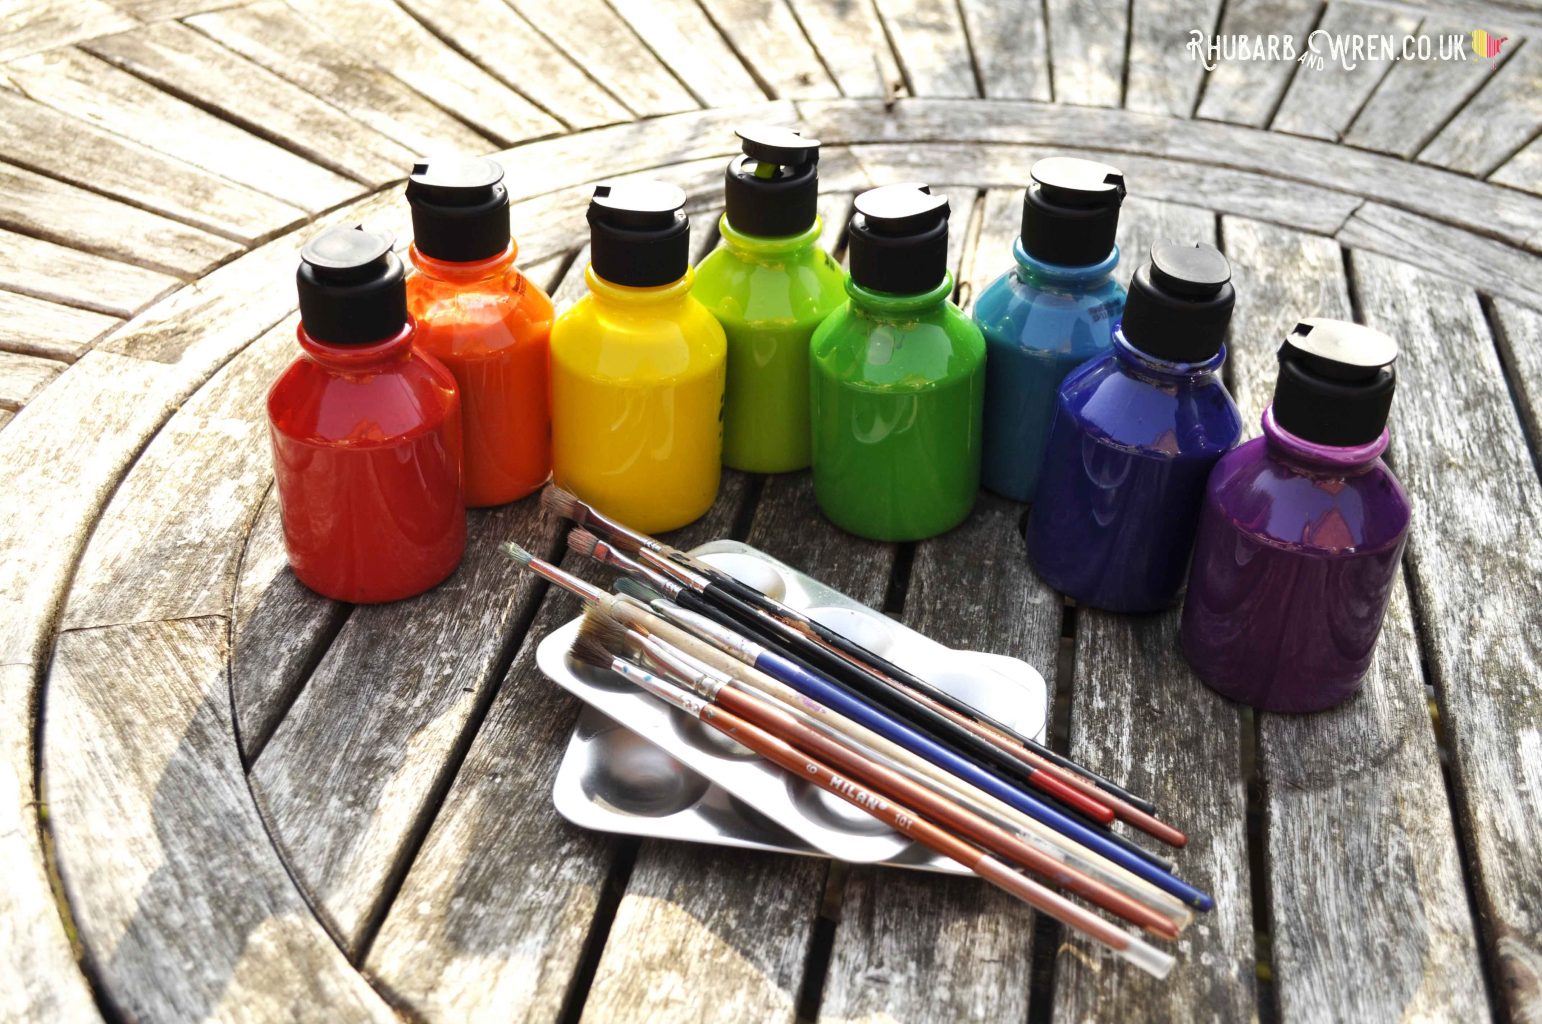 Rainbow shades of paint for decorating a DIY giant bubble wand